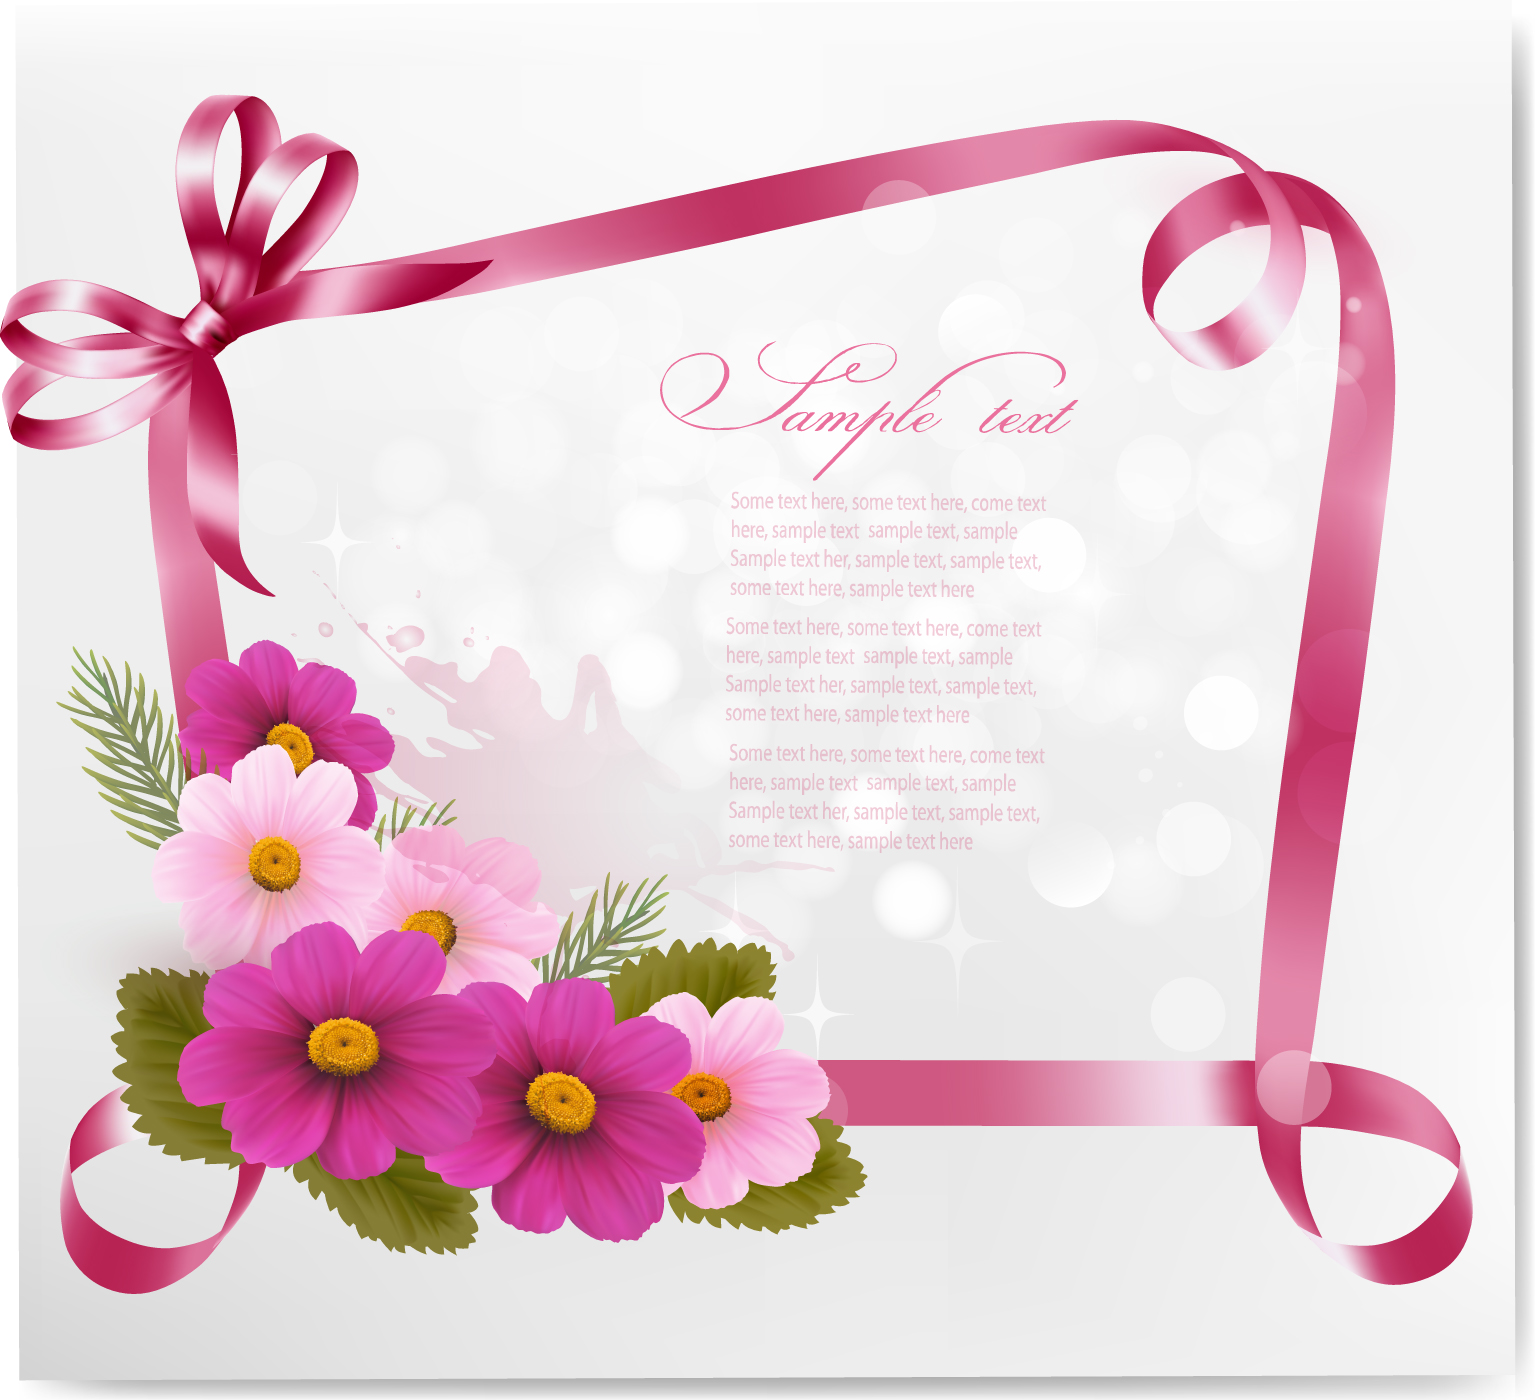 ribbon-with-flower-greeting-card-vector-02-over-millions-vectors